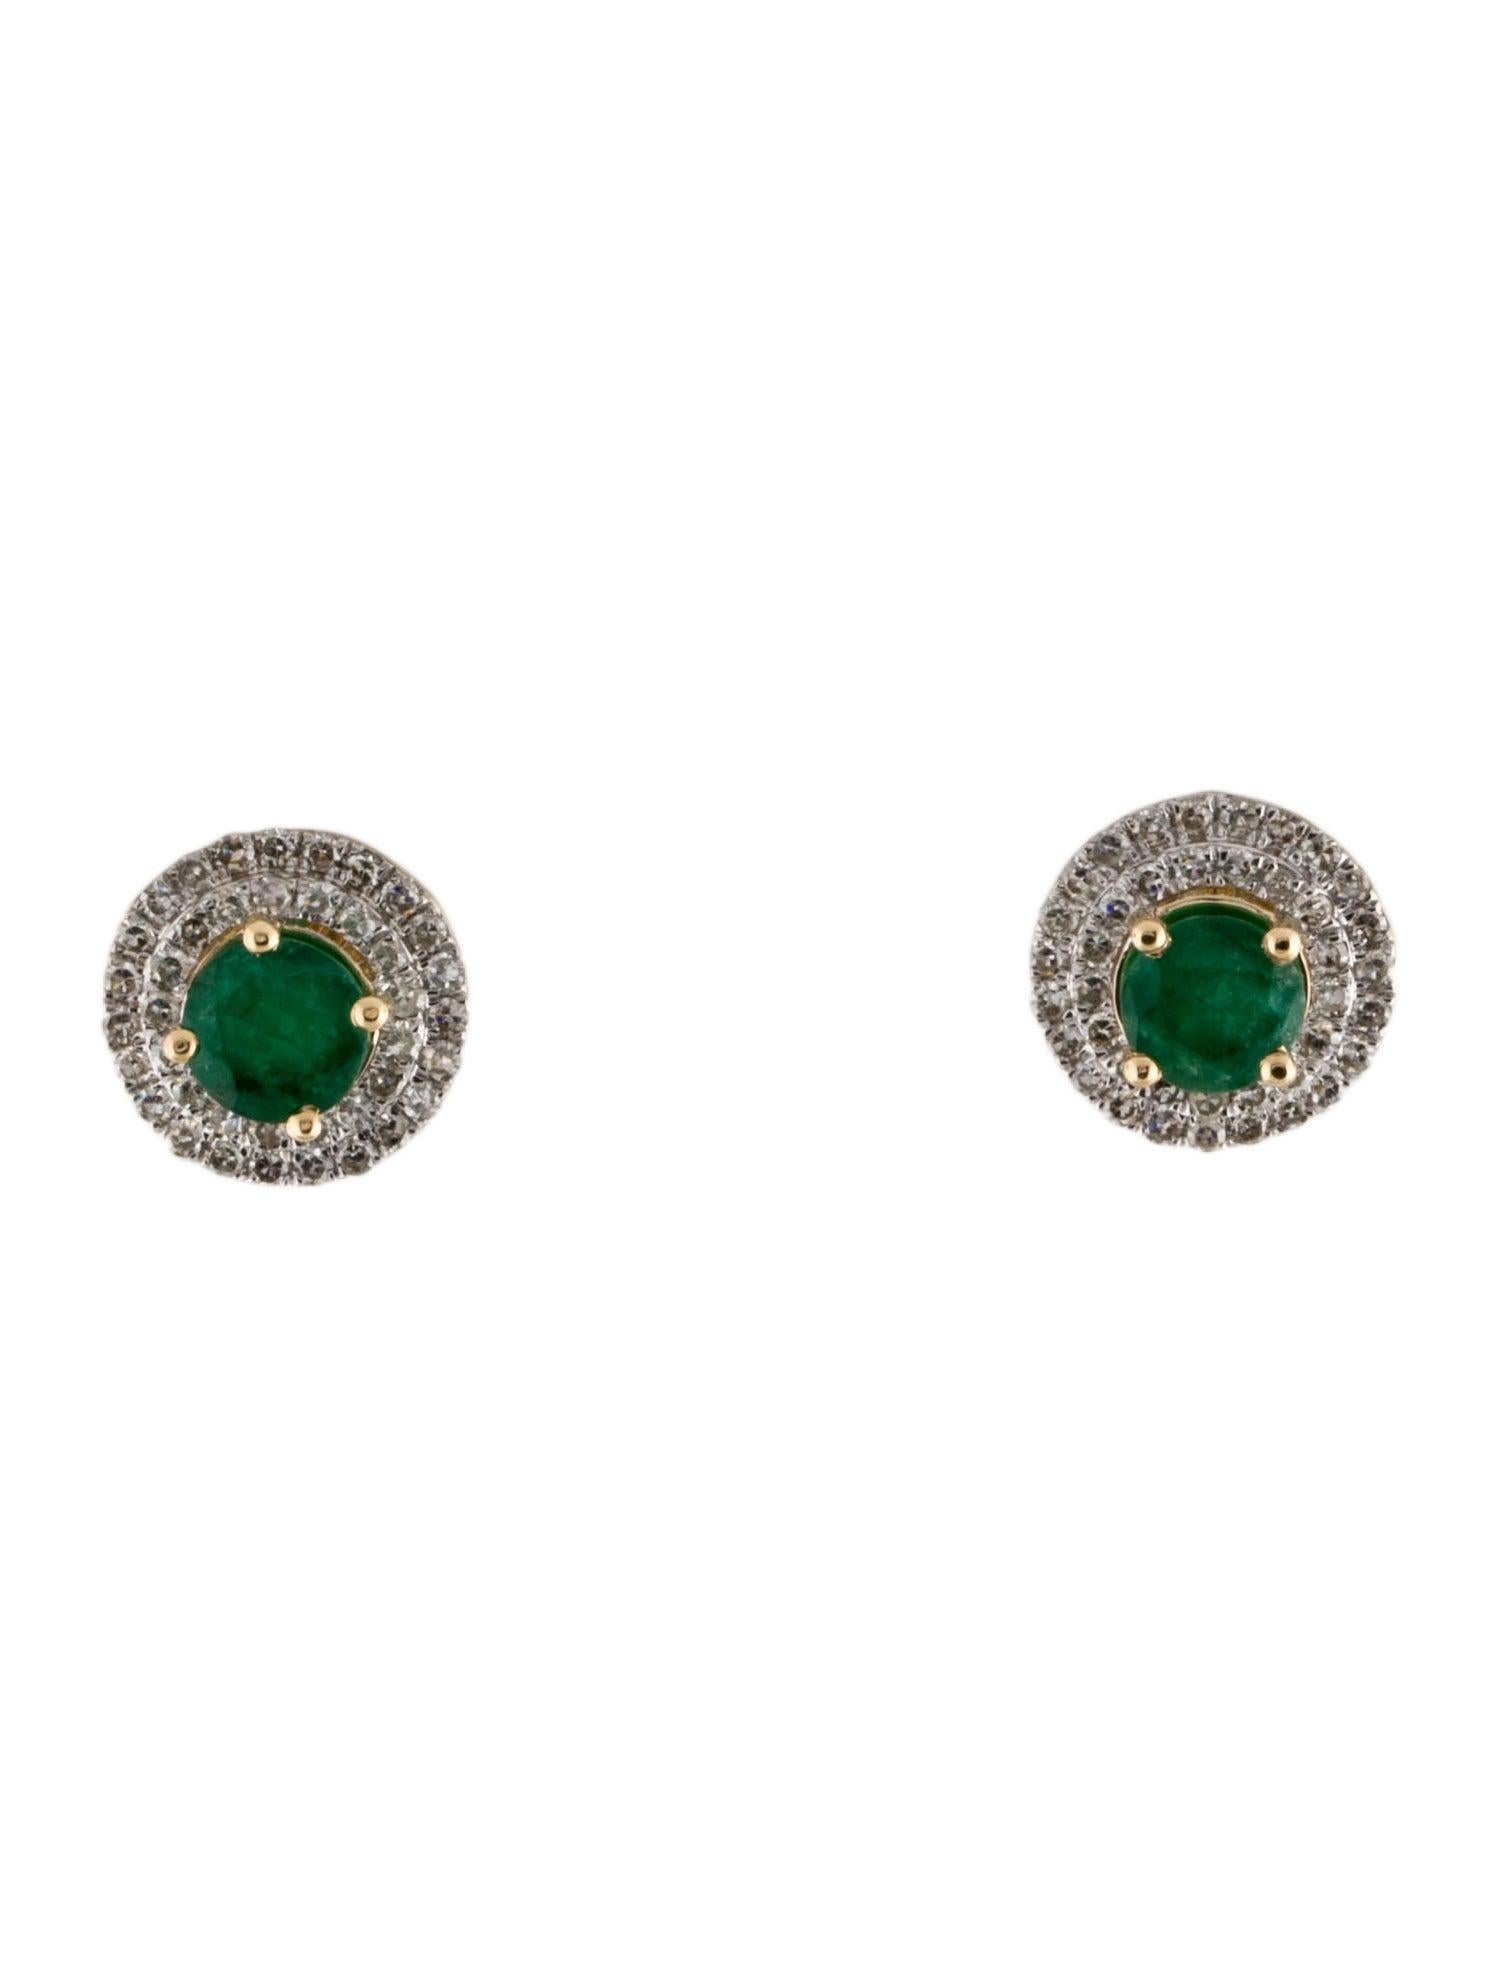 Immerse yourself in the enchanting allure of nature with our Forest Ferns Emerald and Diamond Earrings. Inspired by the verdant beauty of the world's lush forests, this exquisite collection captures the essence of nature's elegance.

Crafted with